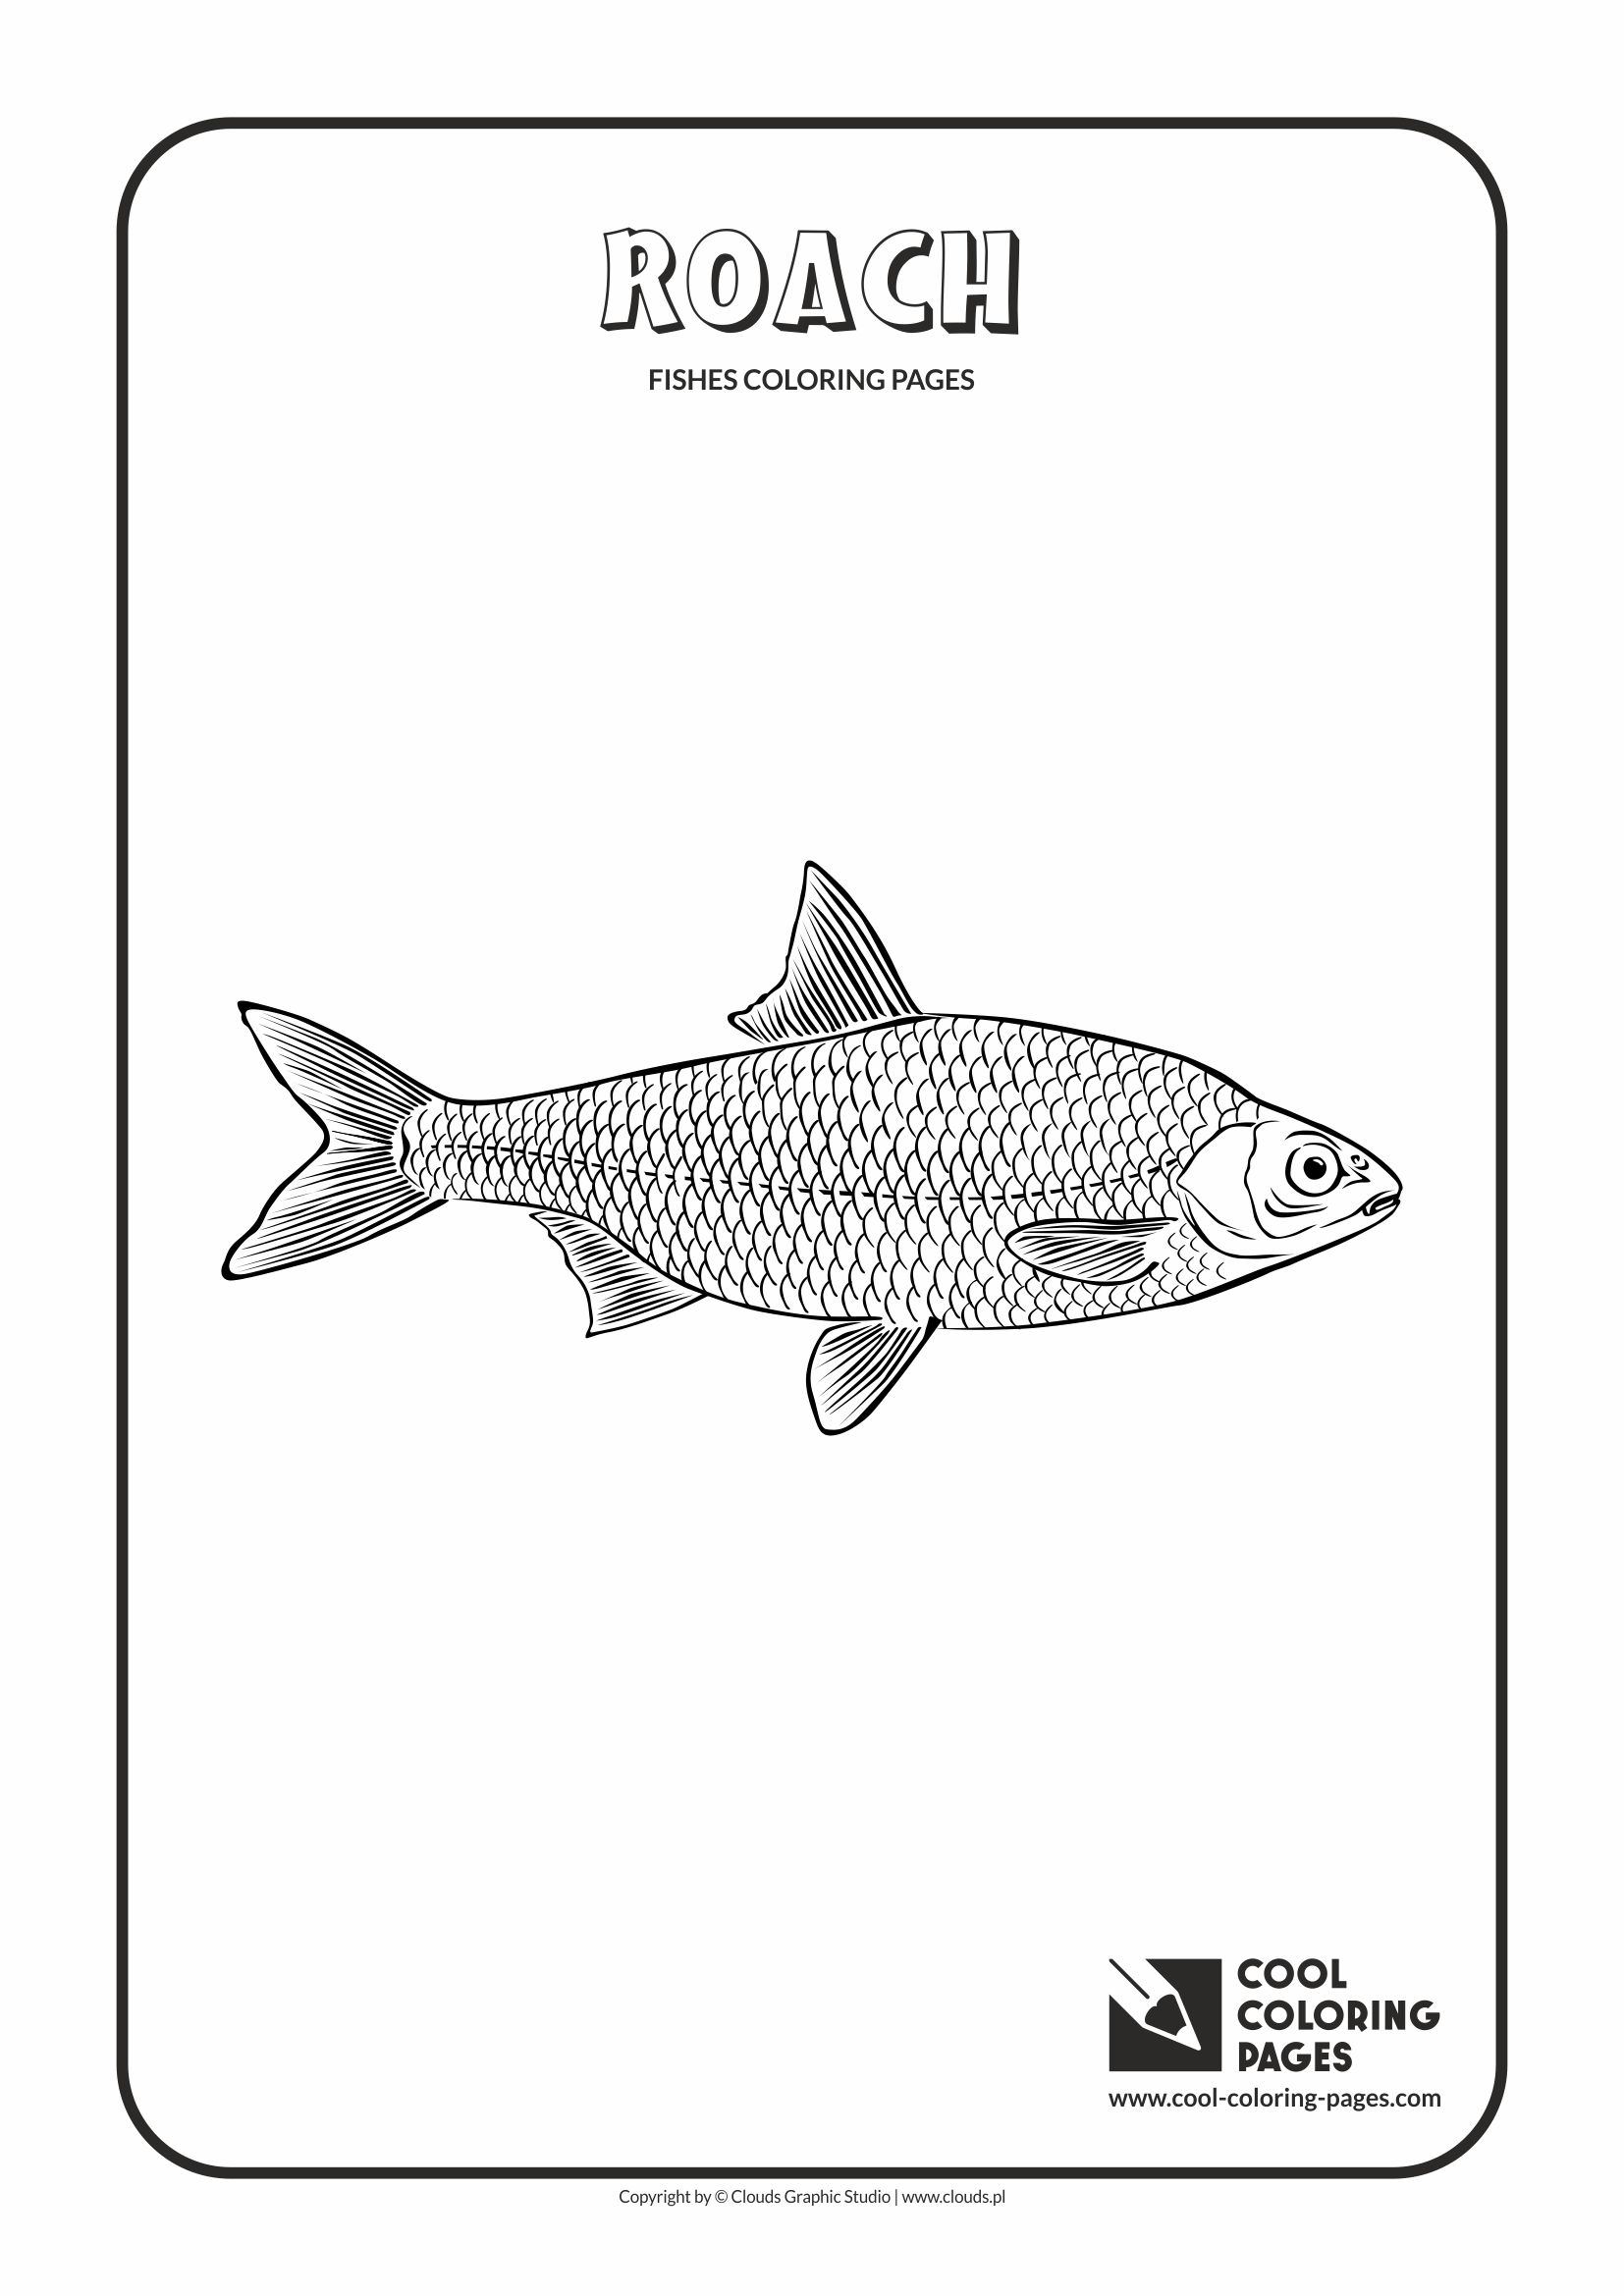 Cool Coloring Pages - Animals / Roach / Coloring page with roach